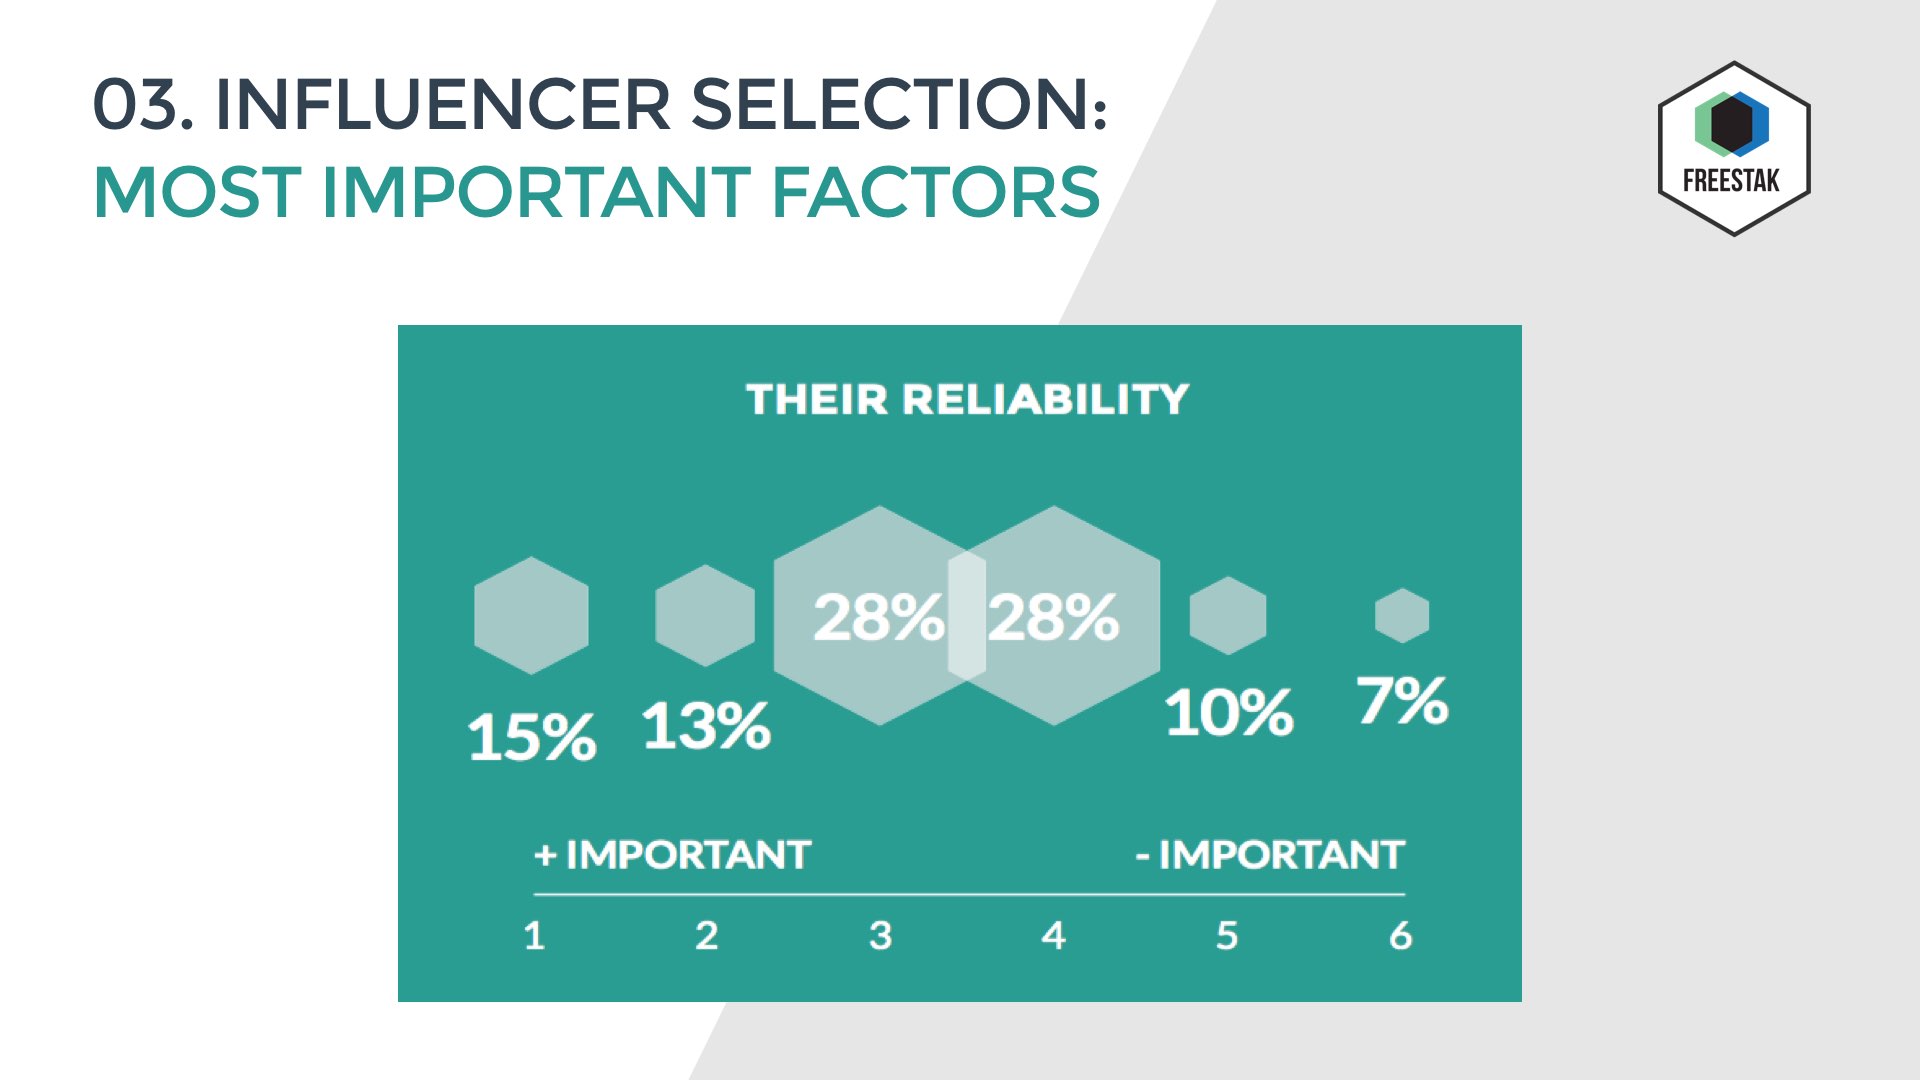 Influencer Marketing Report - Key Insights - Influencers Selection factors